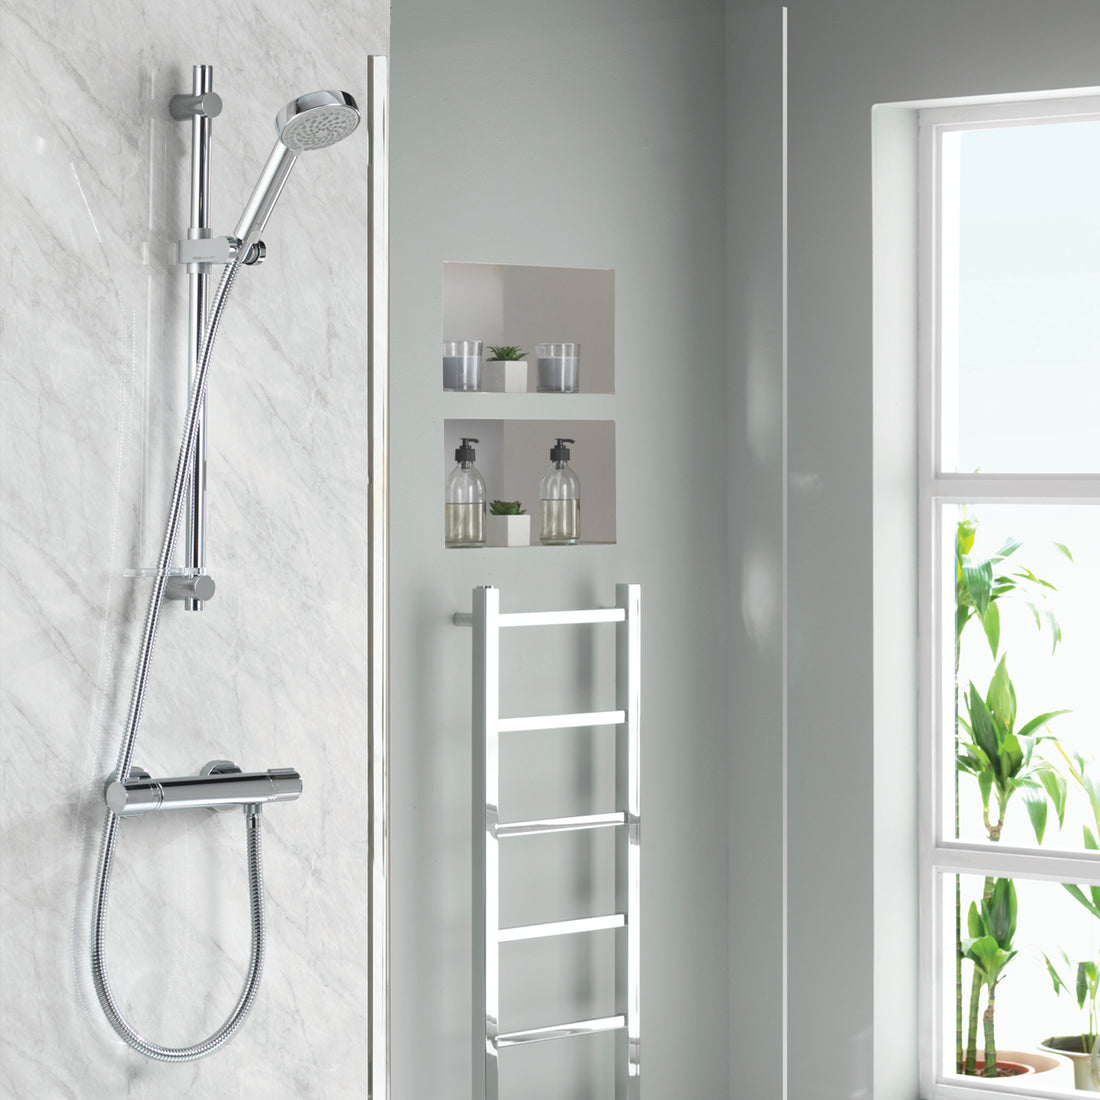 Aqualisa Midas 110 Bar Shower - Exposed With Adjustable Head against shower wall panels in white MD110S